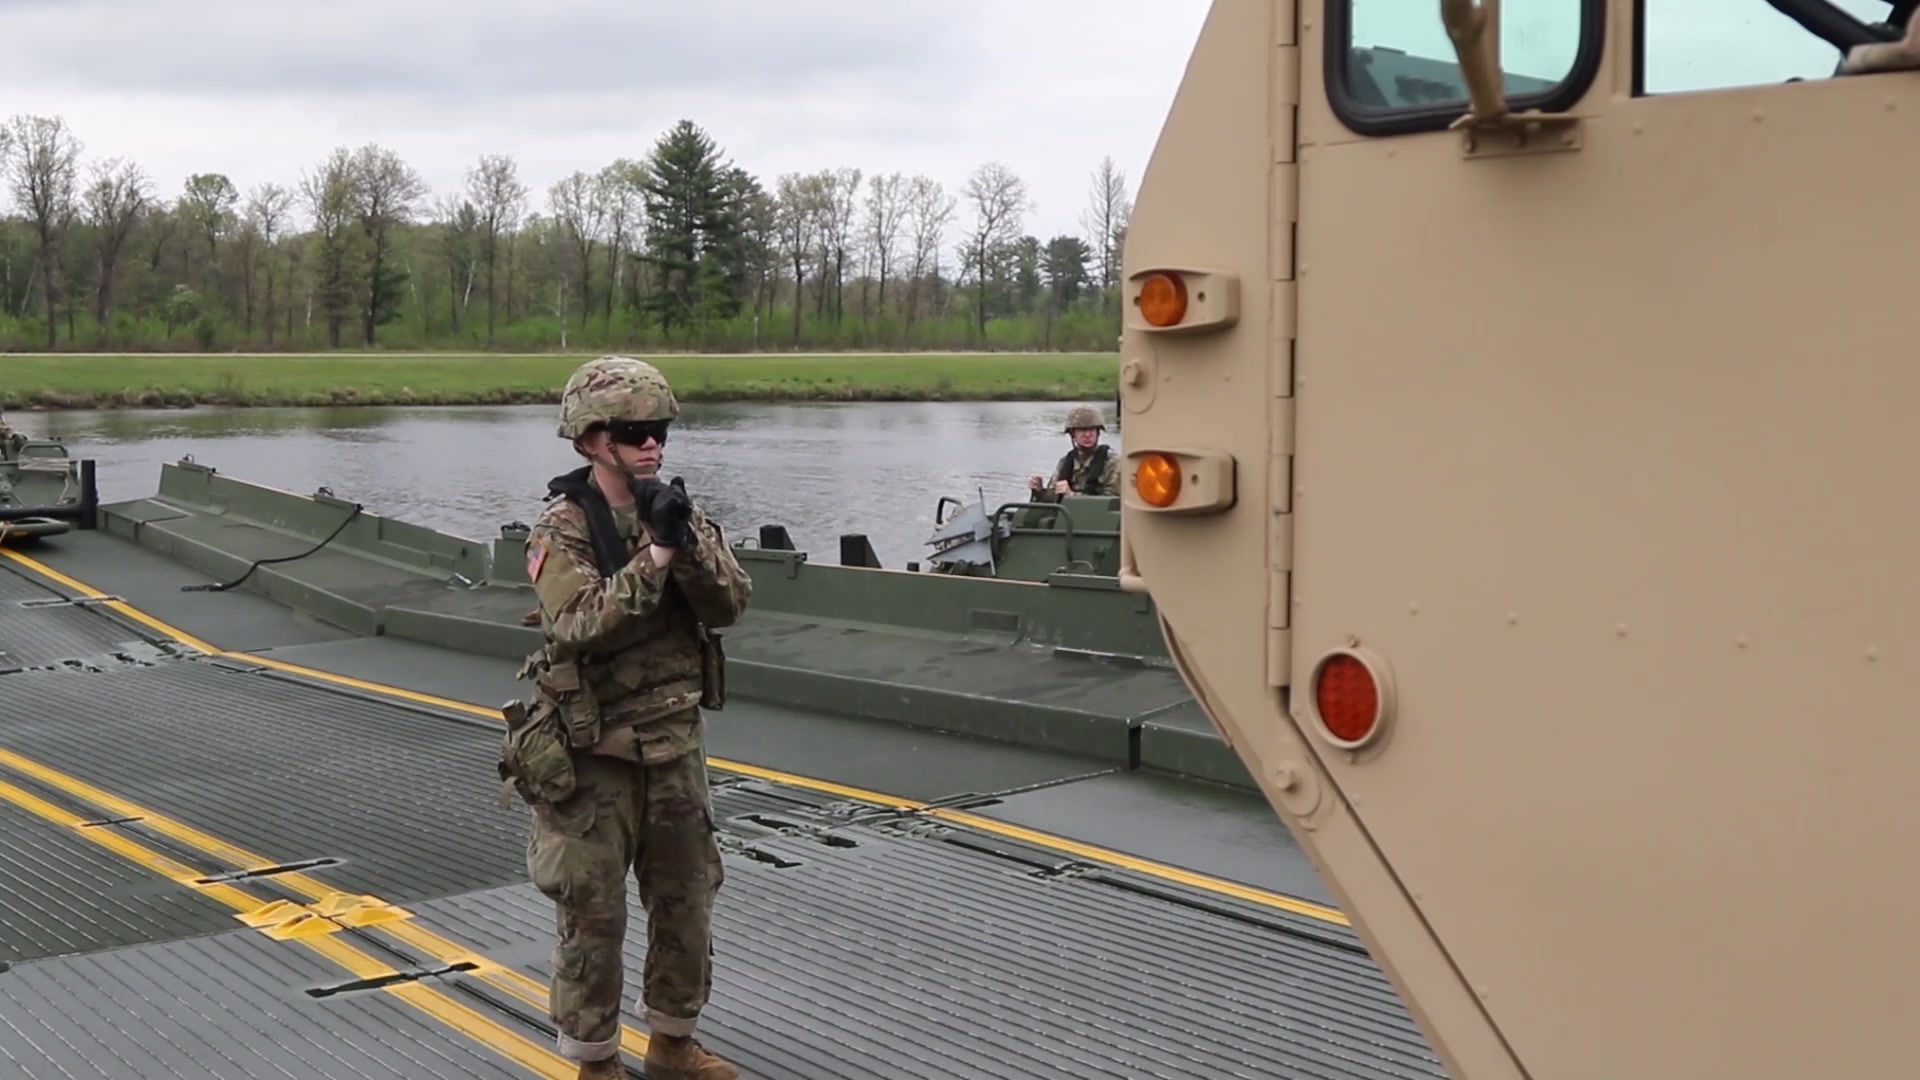 U.S. Army Reserve Soldiers with the 652nd Engineer Company train on building rafts to move vehicles from one side of a body of water to the other.